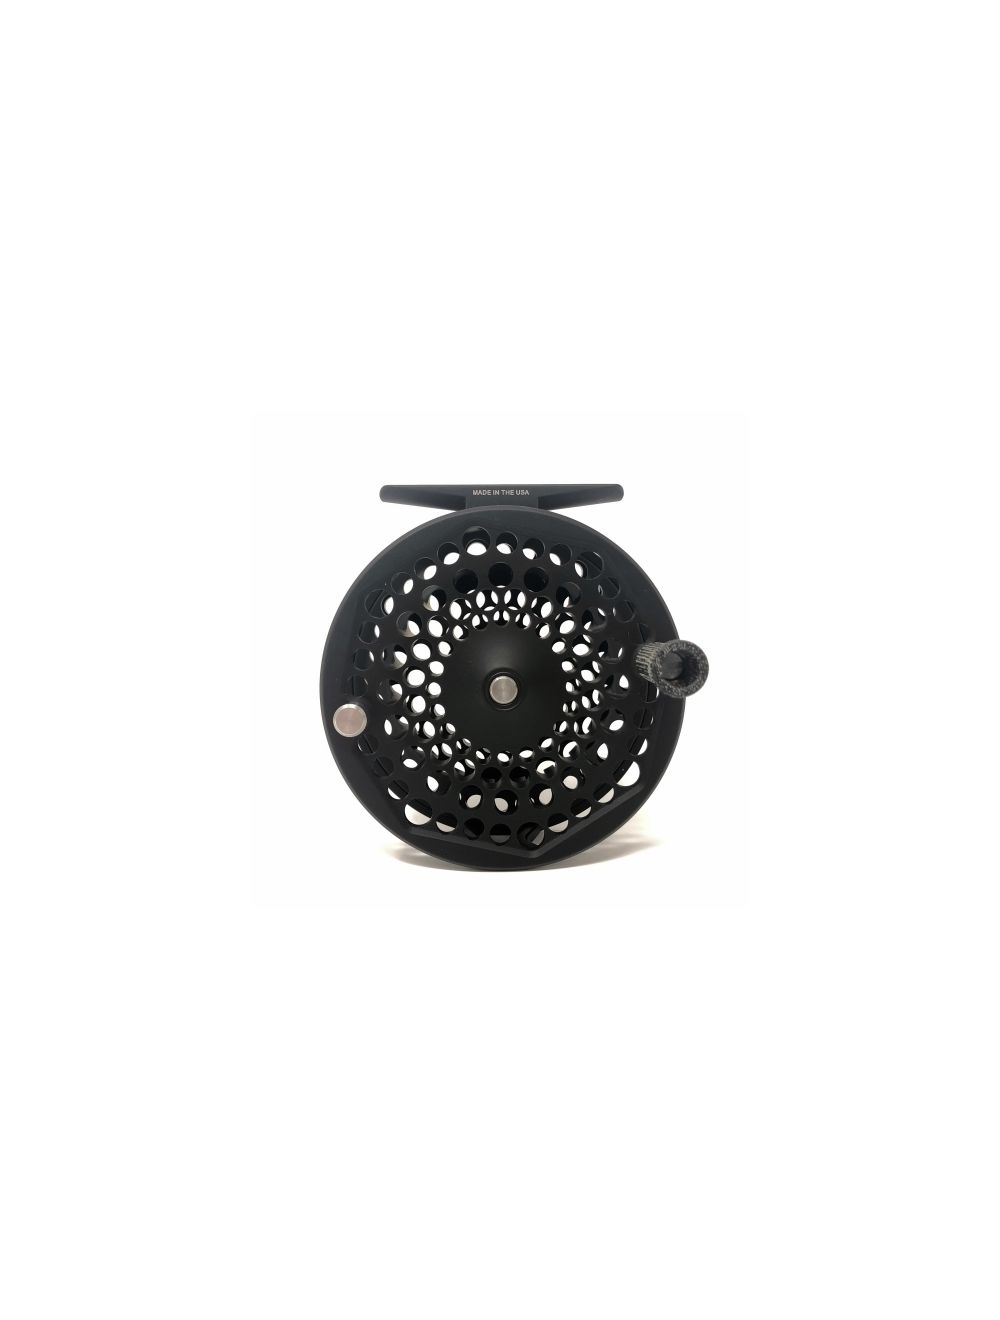 Ross Reels USA Gunnison Fly Fishing Reel Product Details